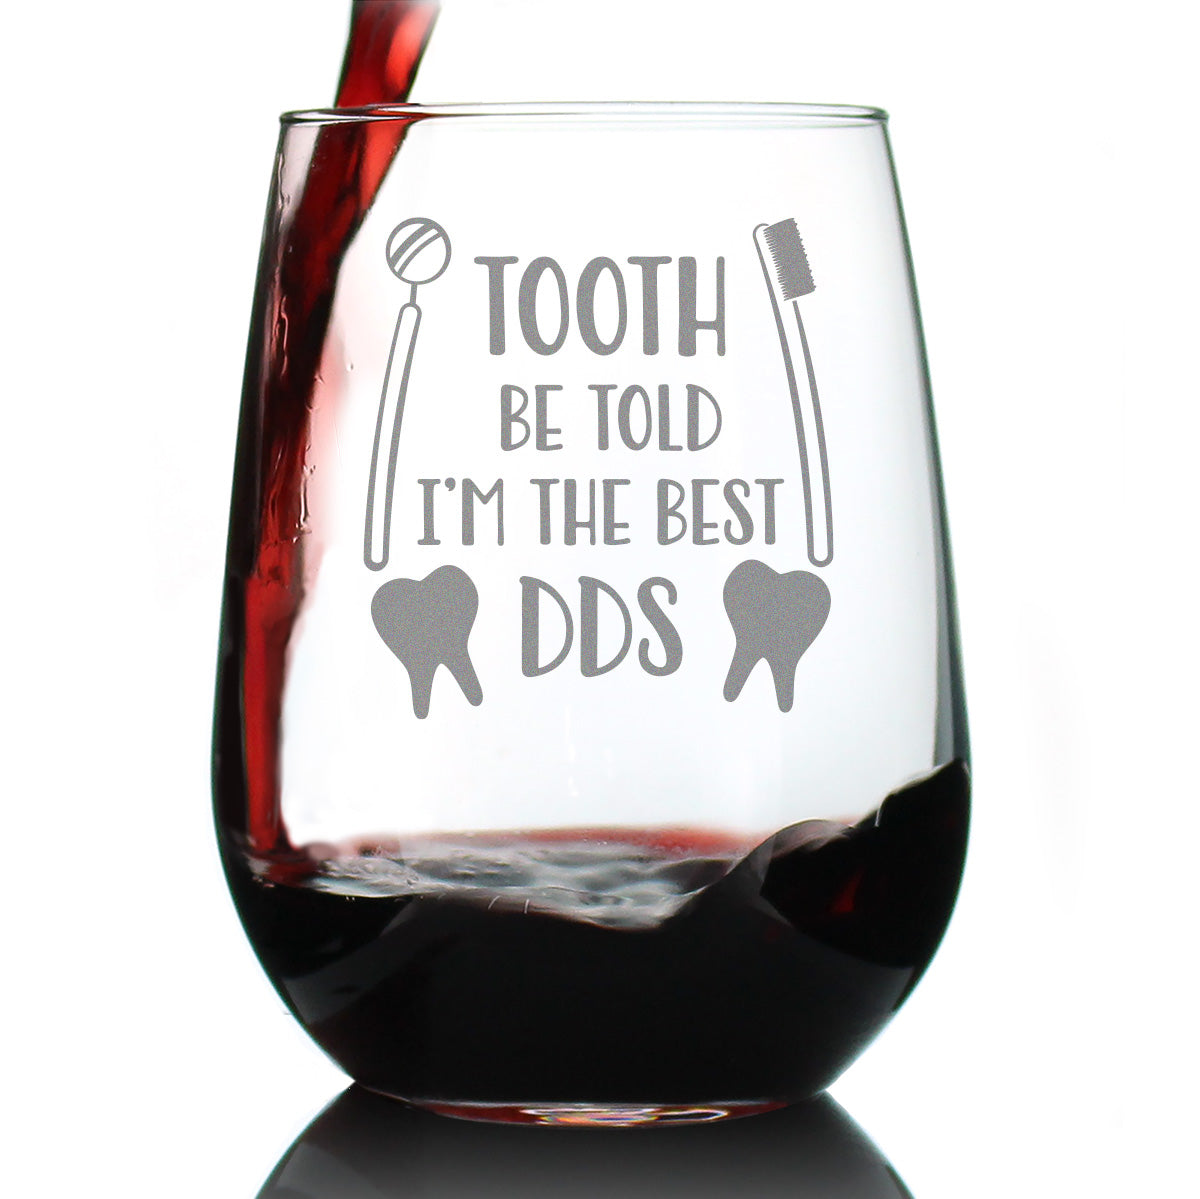 Tooth Be Told - 17 Ounce Stemless Wine Glass